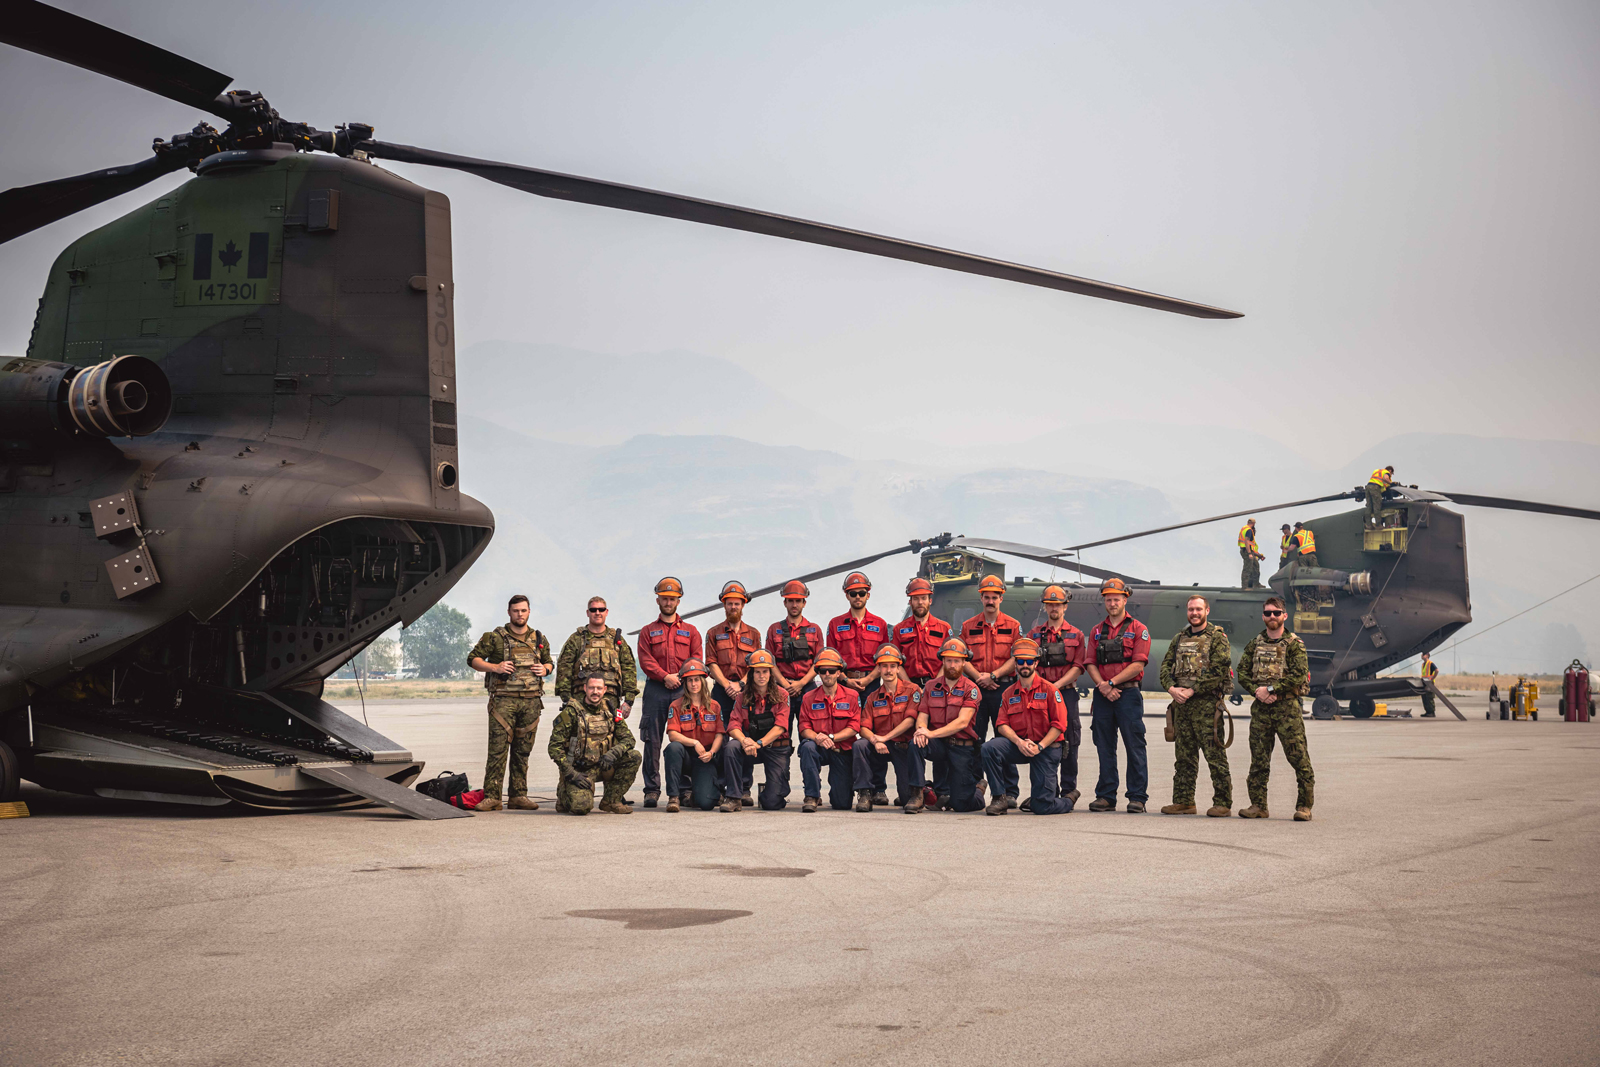 Air crew from 450 Tactical Helicopter Squadron and B.C. Wildfire Service members pose for a group photo at YKA Kamloops Airport, B.C., on July 15. Photo by S1 Victoria Ioganov, MARPAC Imaging Services, Canadian Armed Forces photo